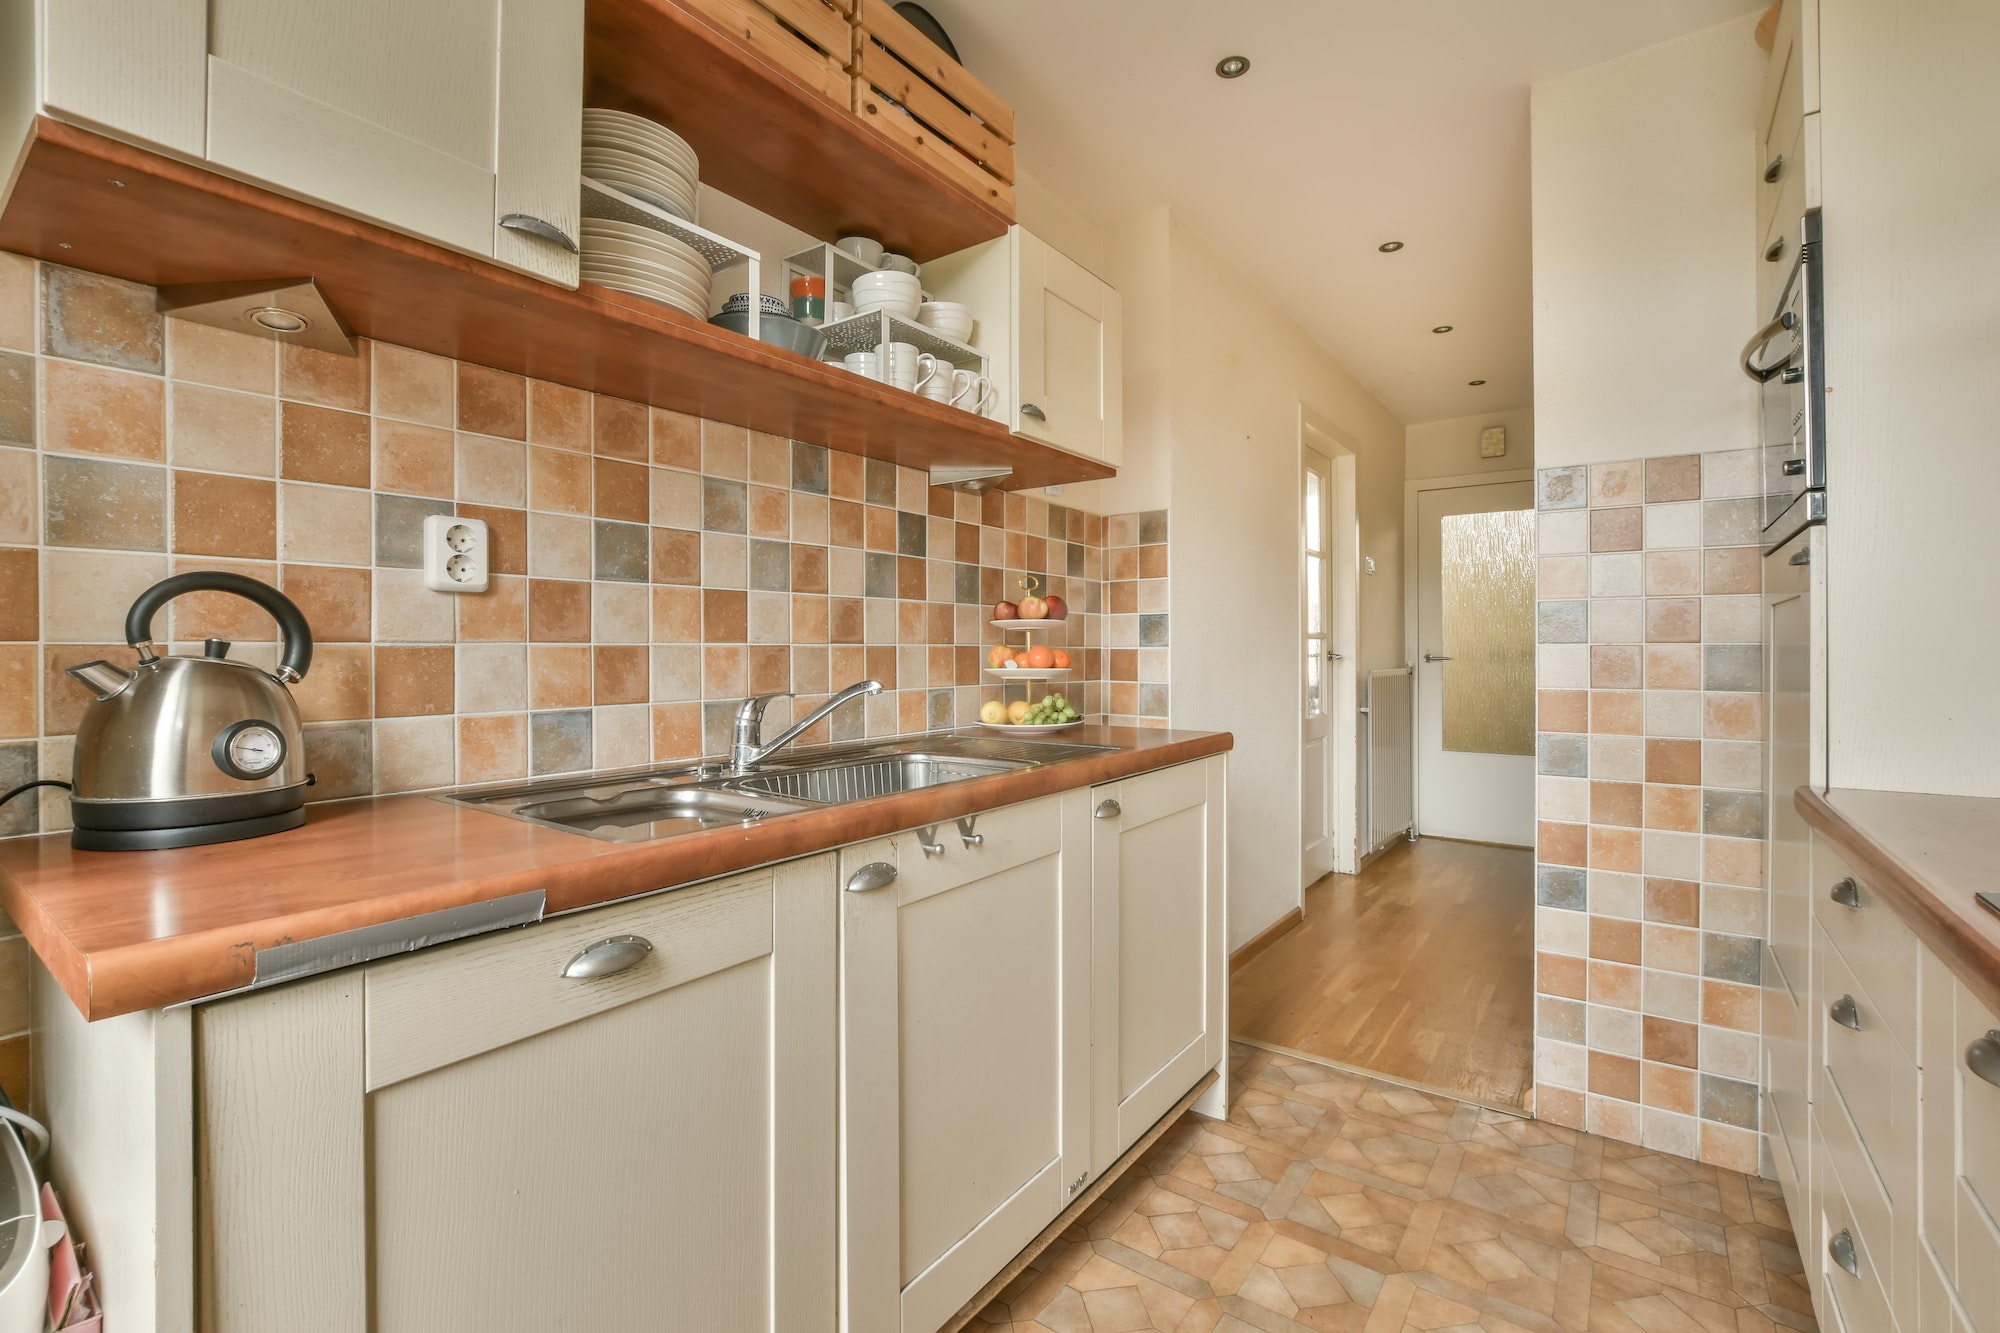 Kitchen with multicolored tiles